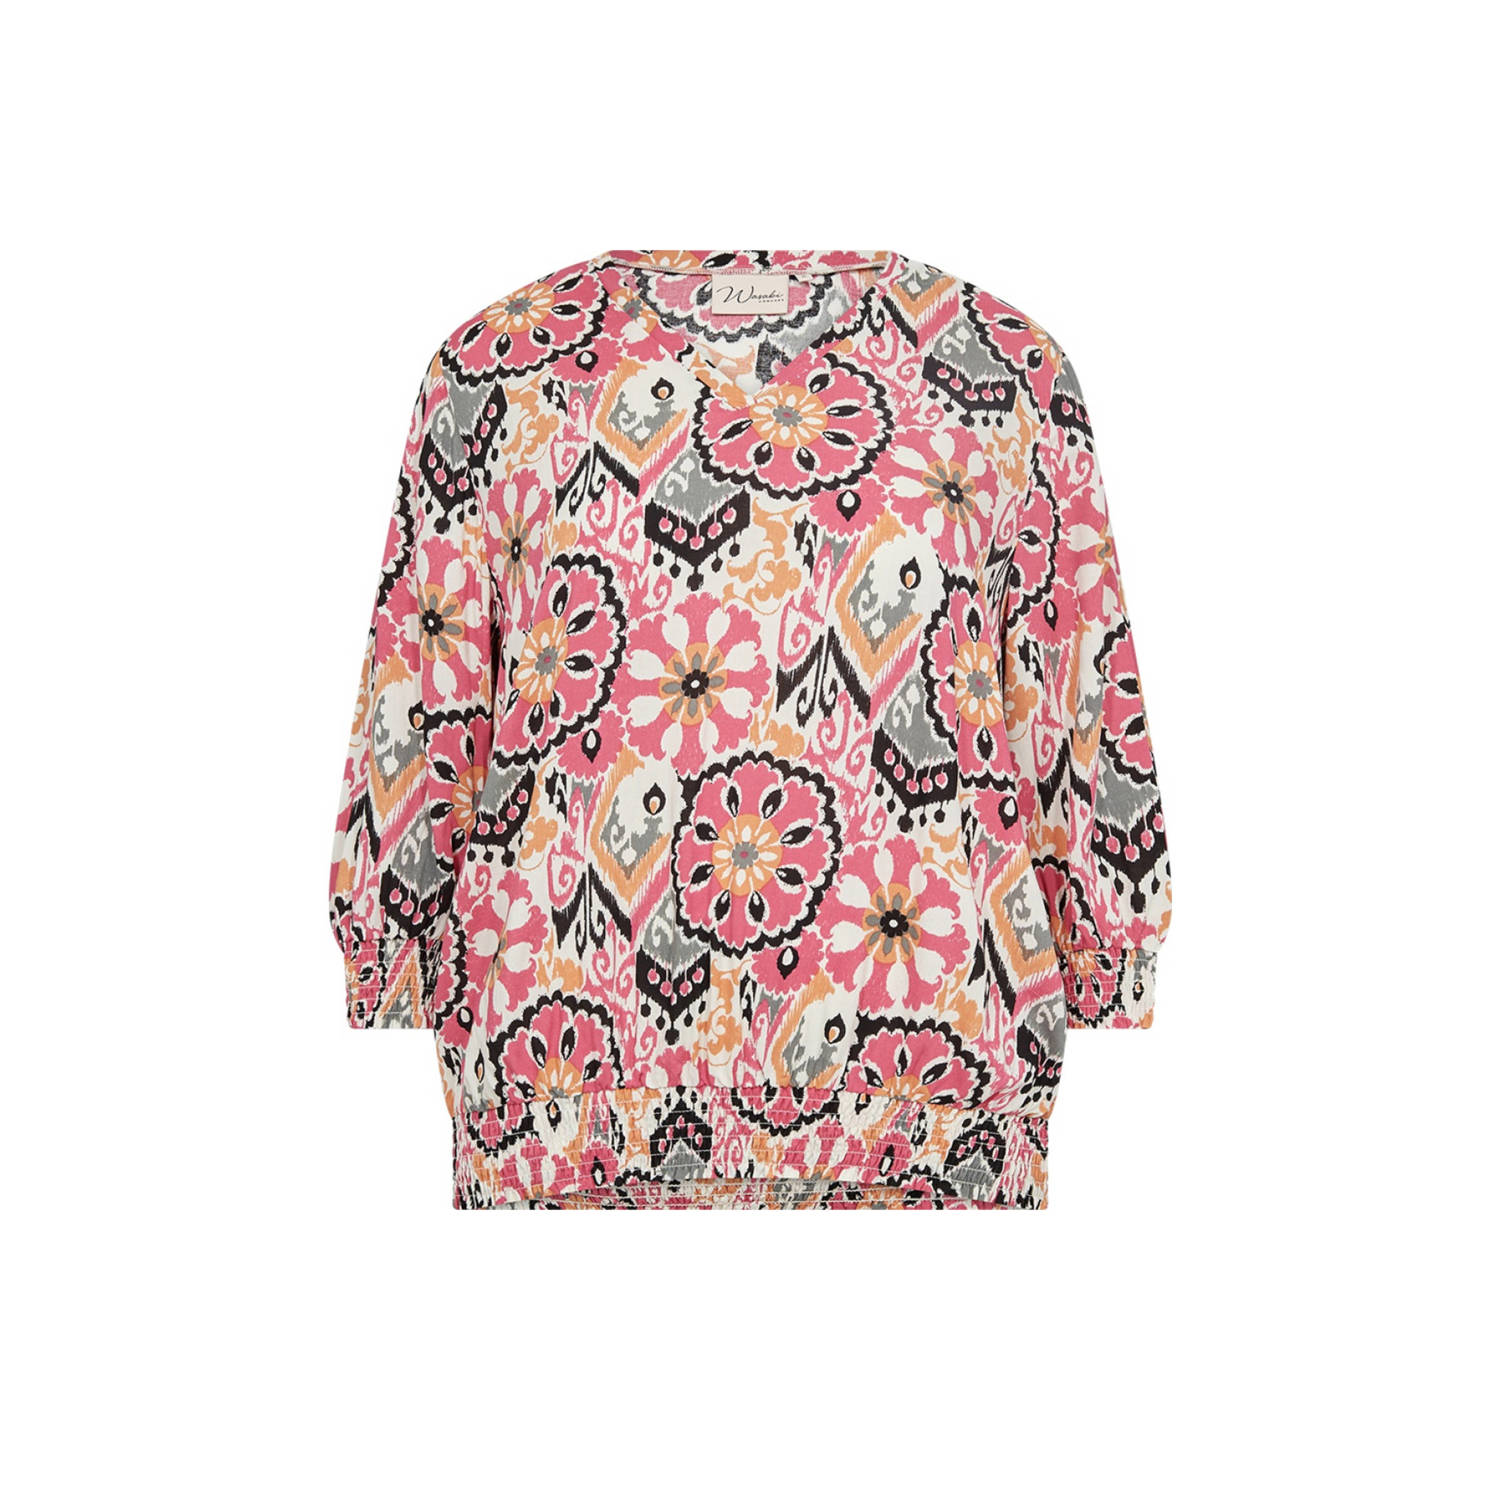 Wasabiconcept blousetop met all over print multi